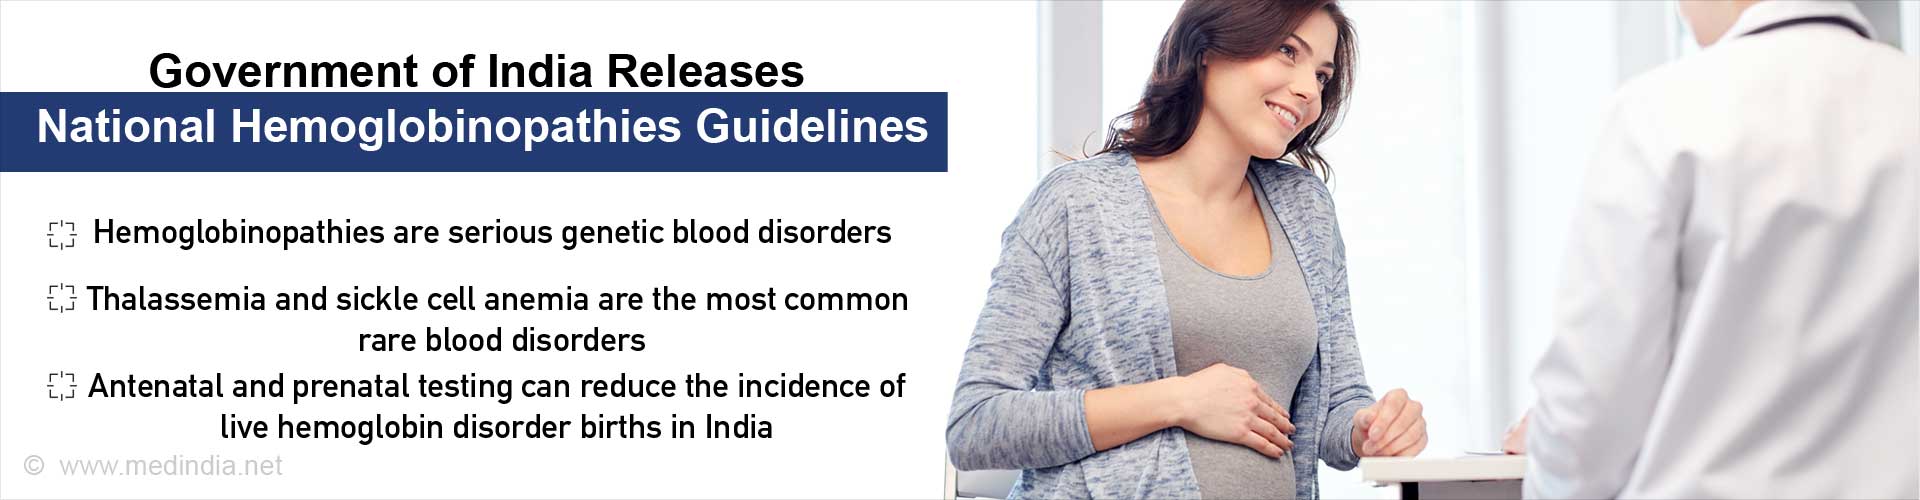 Government of India Releases National Hemoglobinopathies Guidelines 
- Hemoglobinopathies are serious genetic blood disorders
- Thalassemia and sickle cell anemia are the most common rare blood disorders
- Antenatal and prenatal testing can reduce the incidence os live hemoglobin disorder births in India